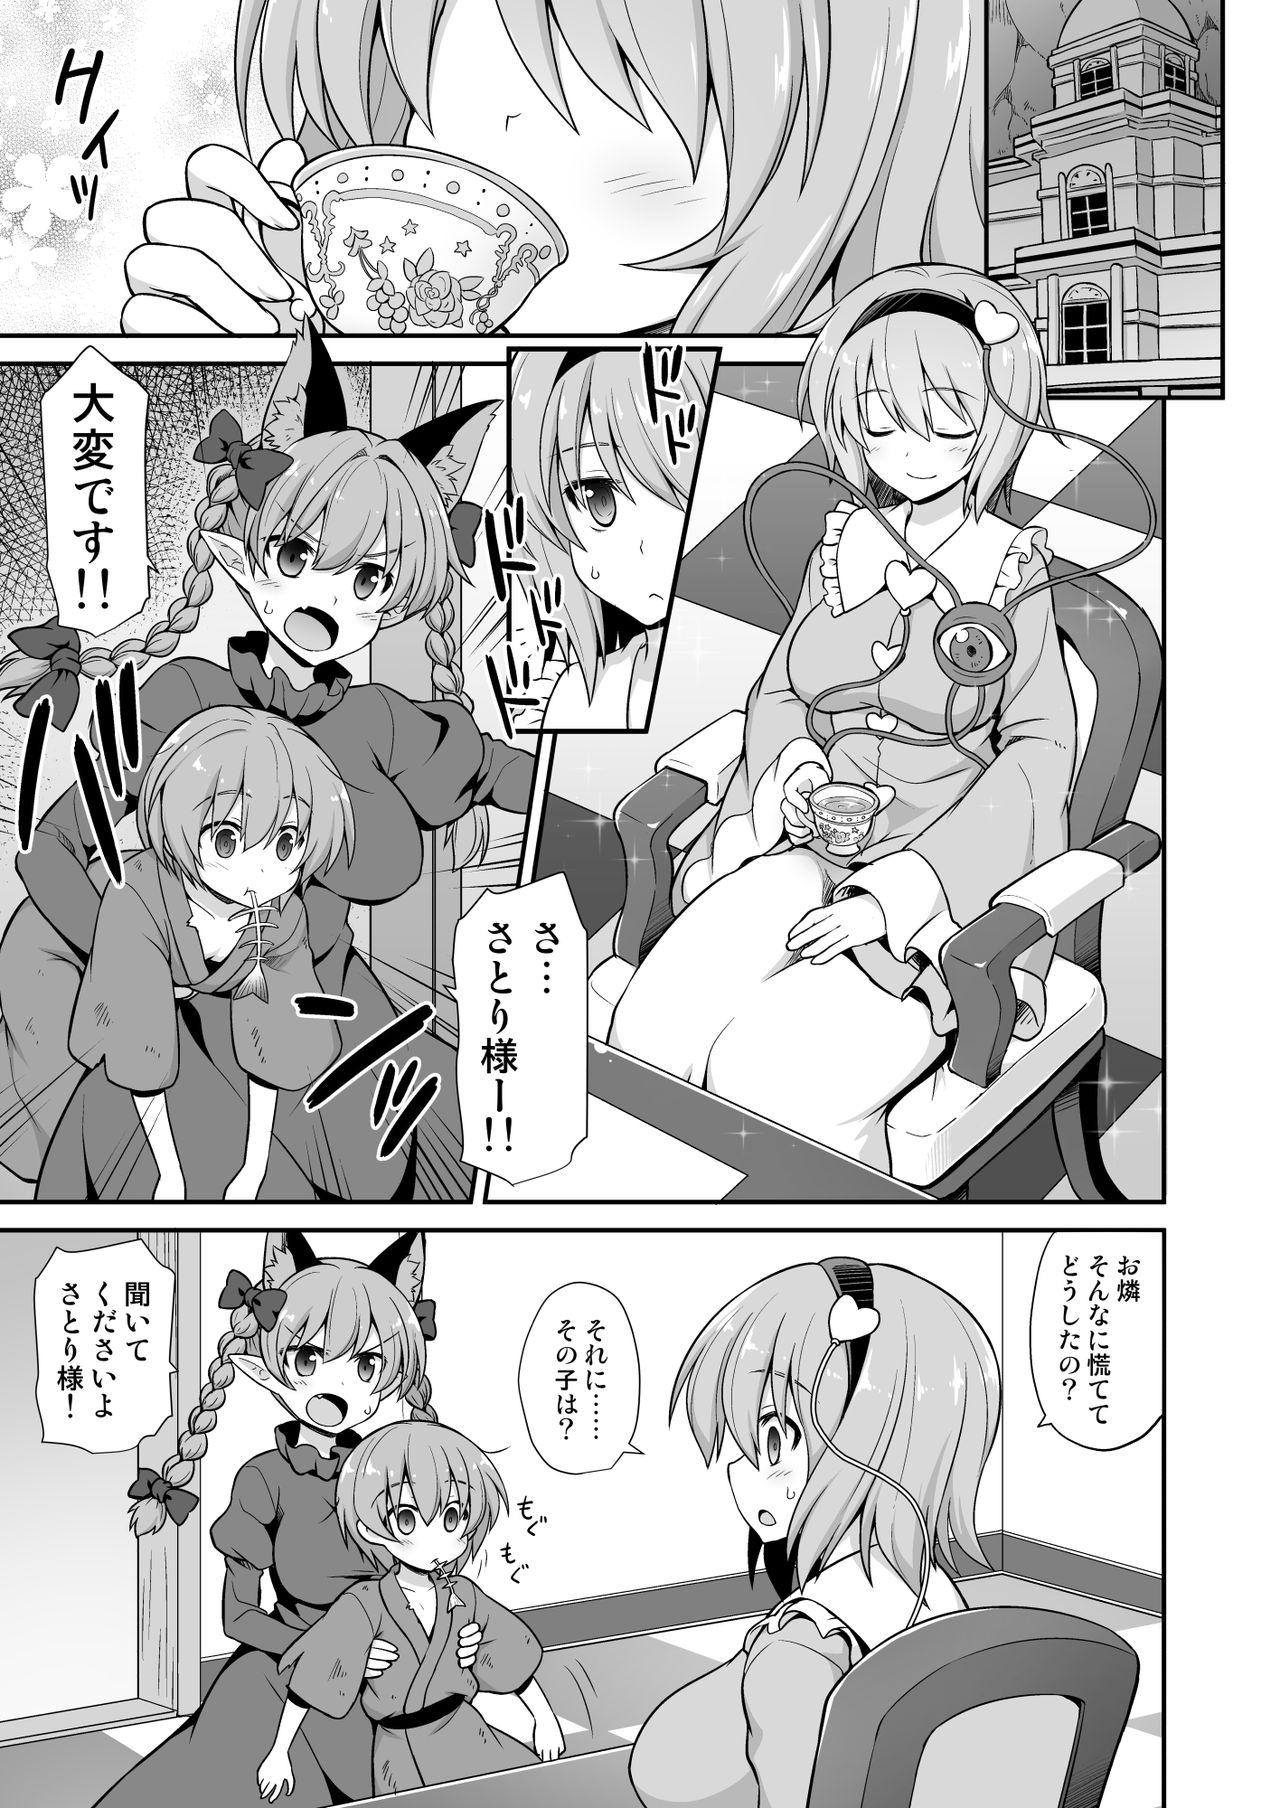 Gapes Gaping Asshole Satori Onee-chan to Icha Love Amaex!! - Touhou project Panty - Page 3